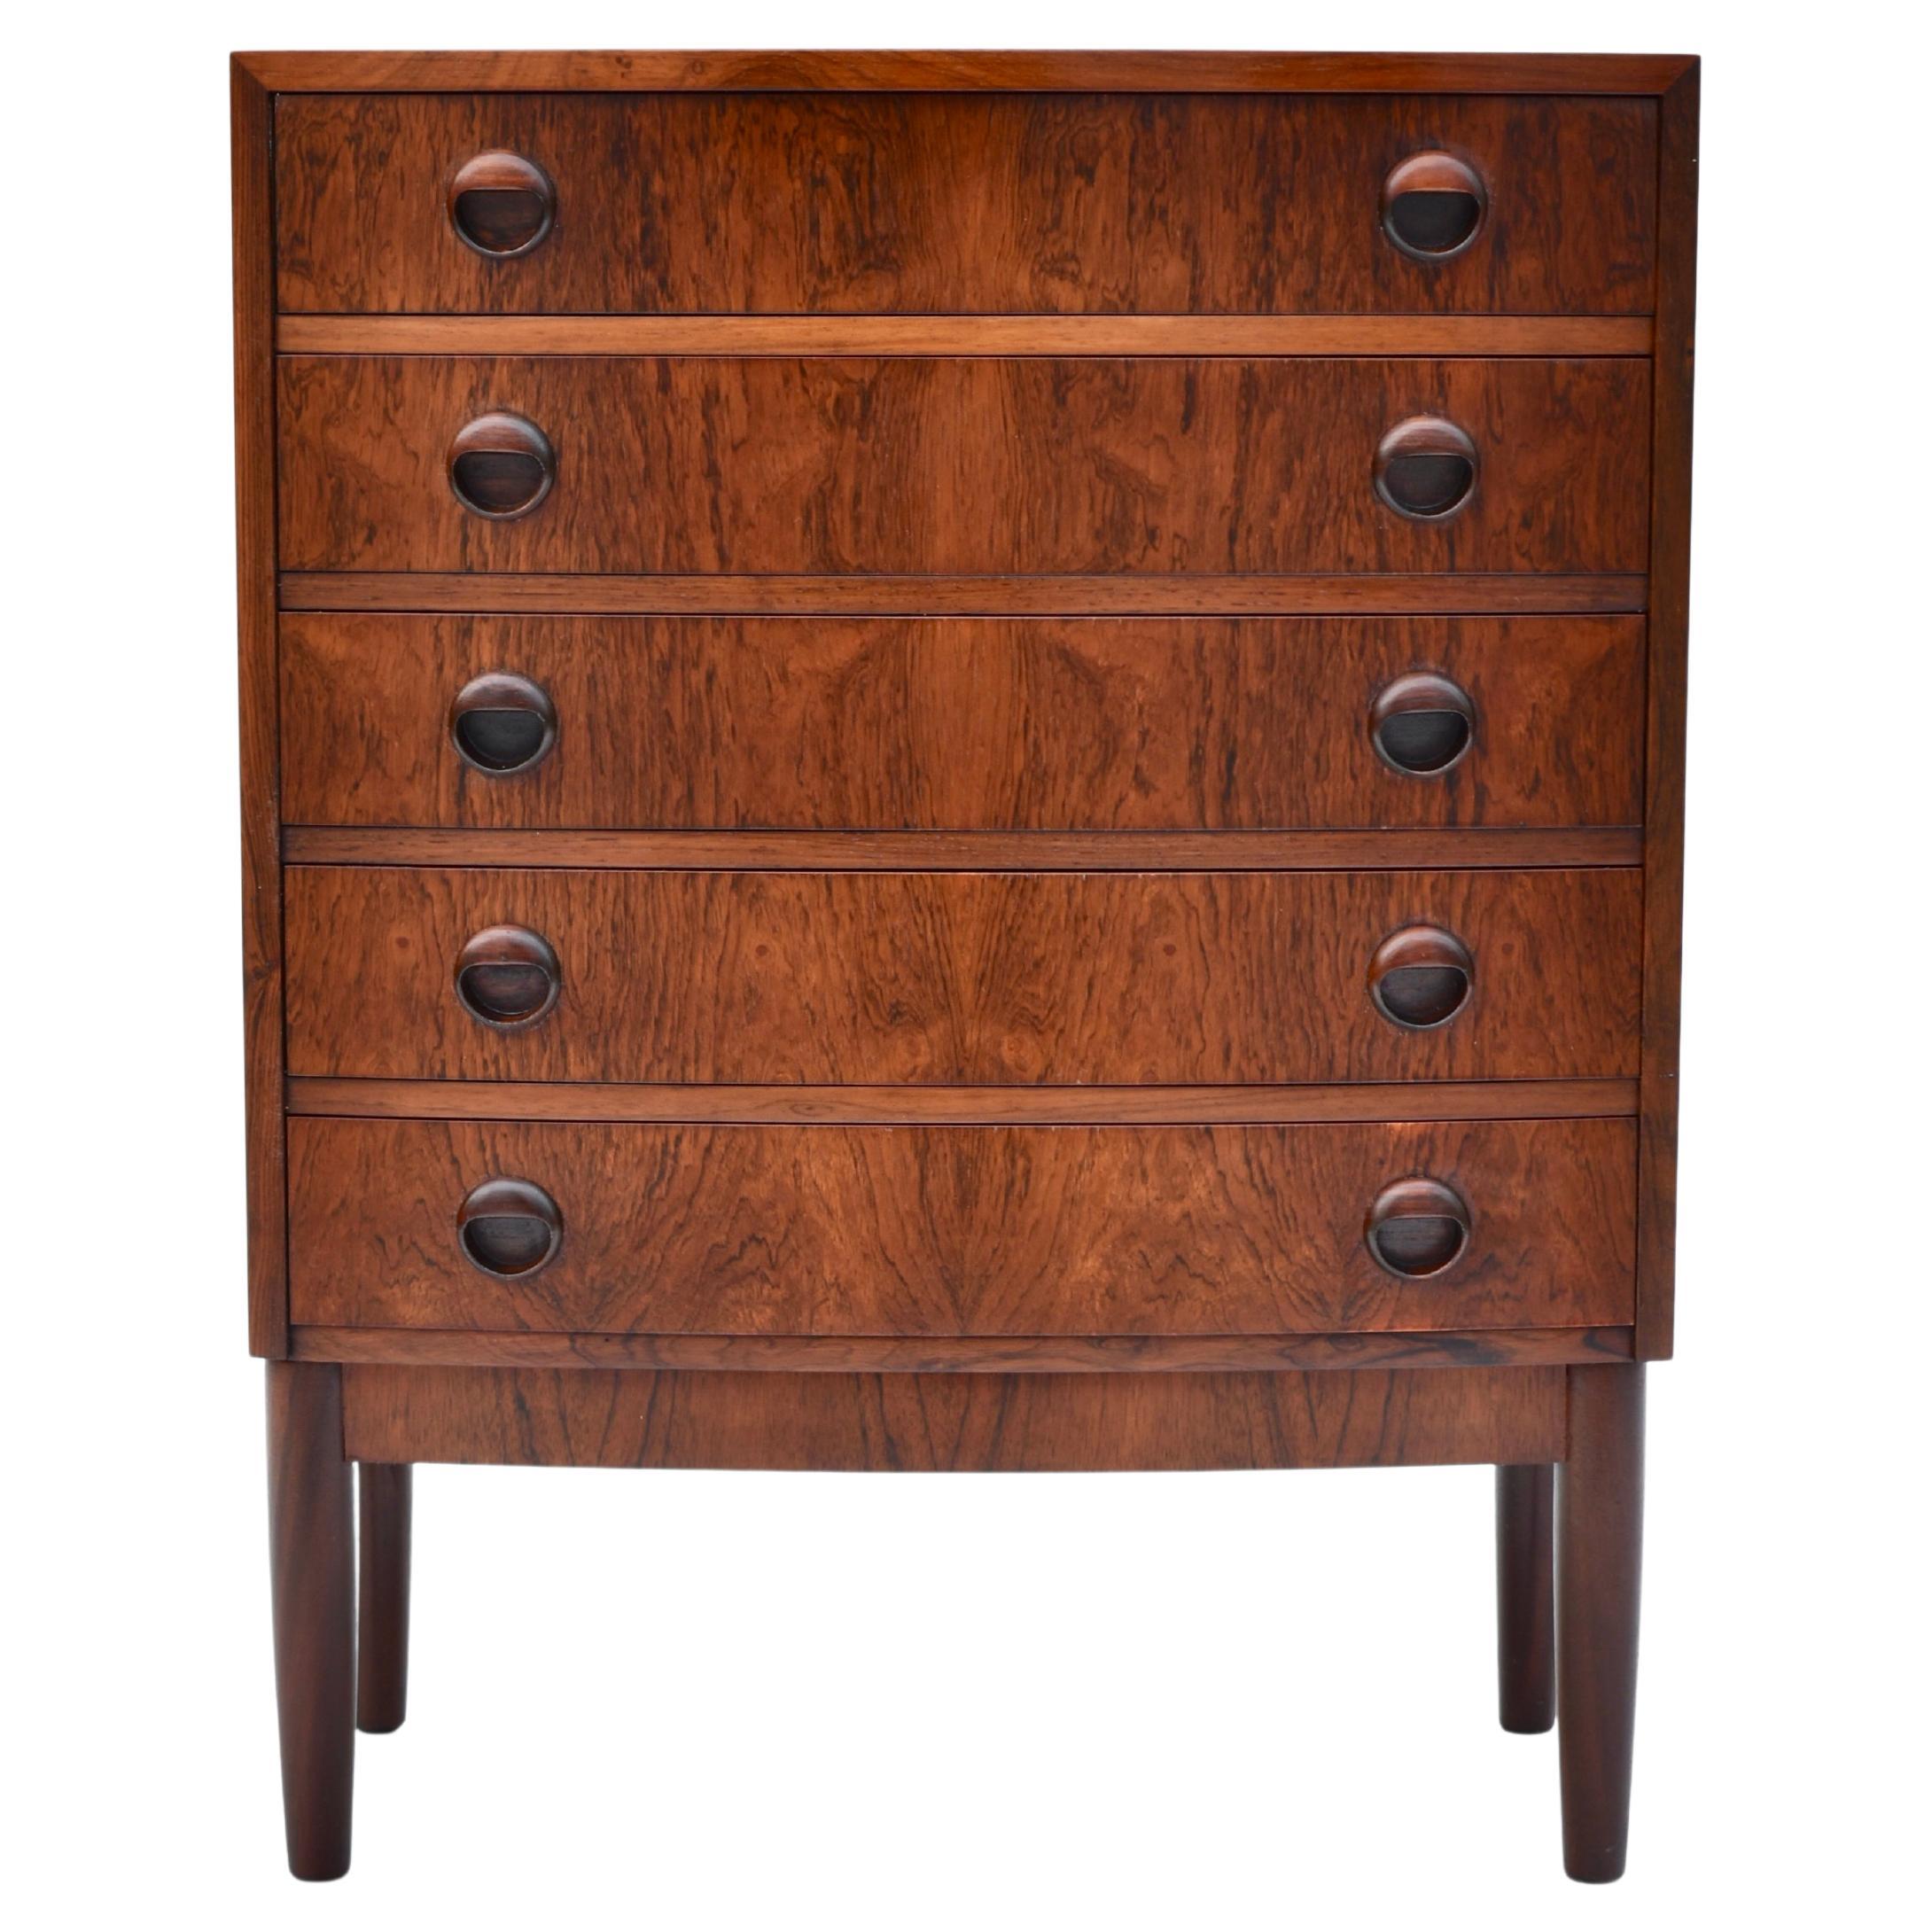 Kai Kristiansen Bow Fronted Chest of Drawers